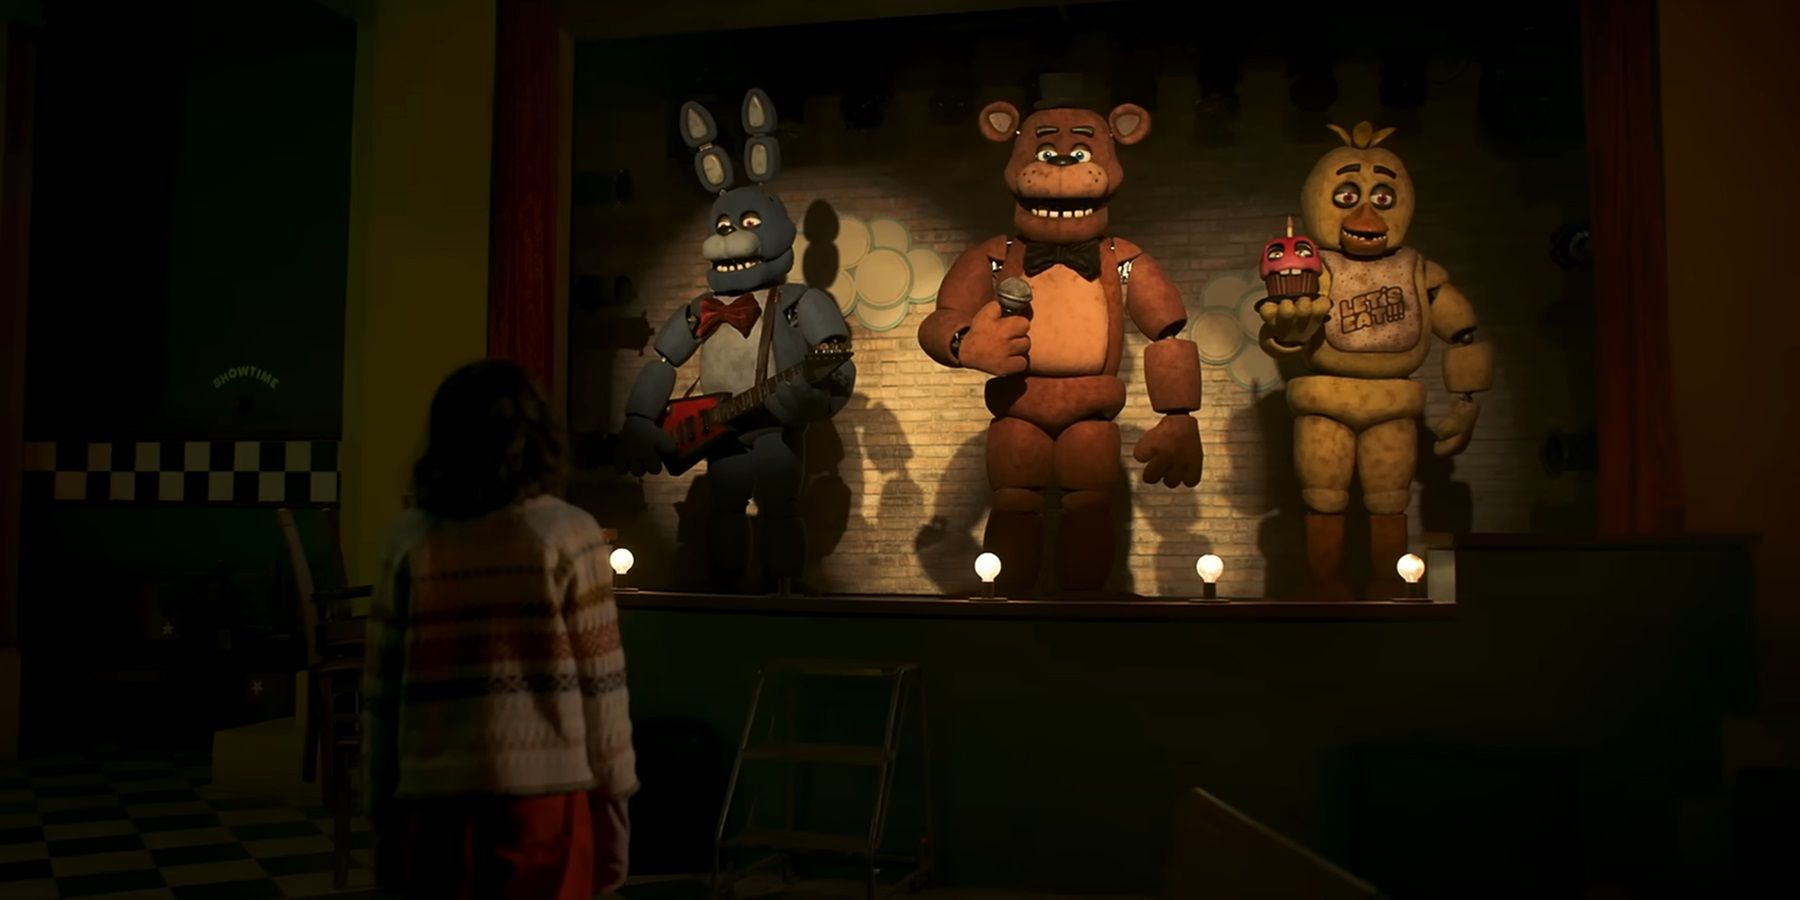 FNAF Movie News: Rotten Tomatoes listed the film as 3 hours long